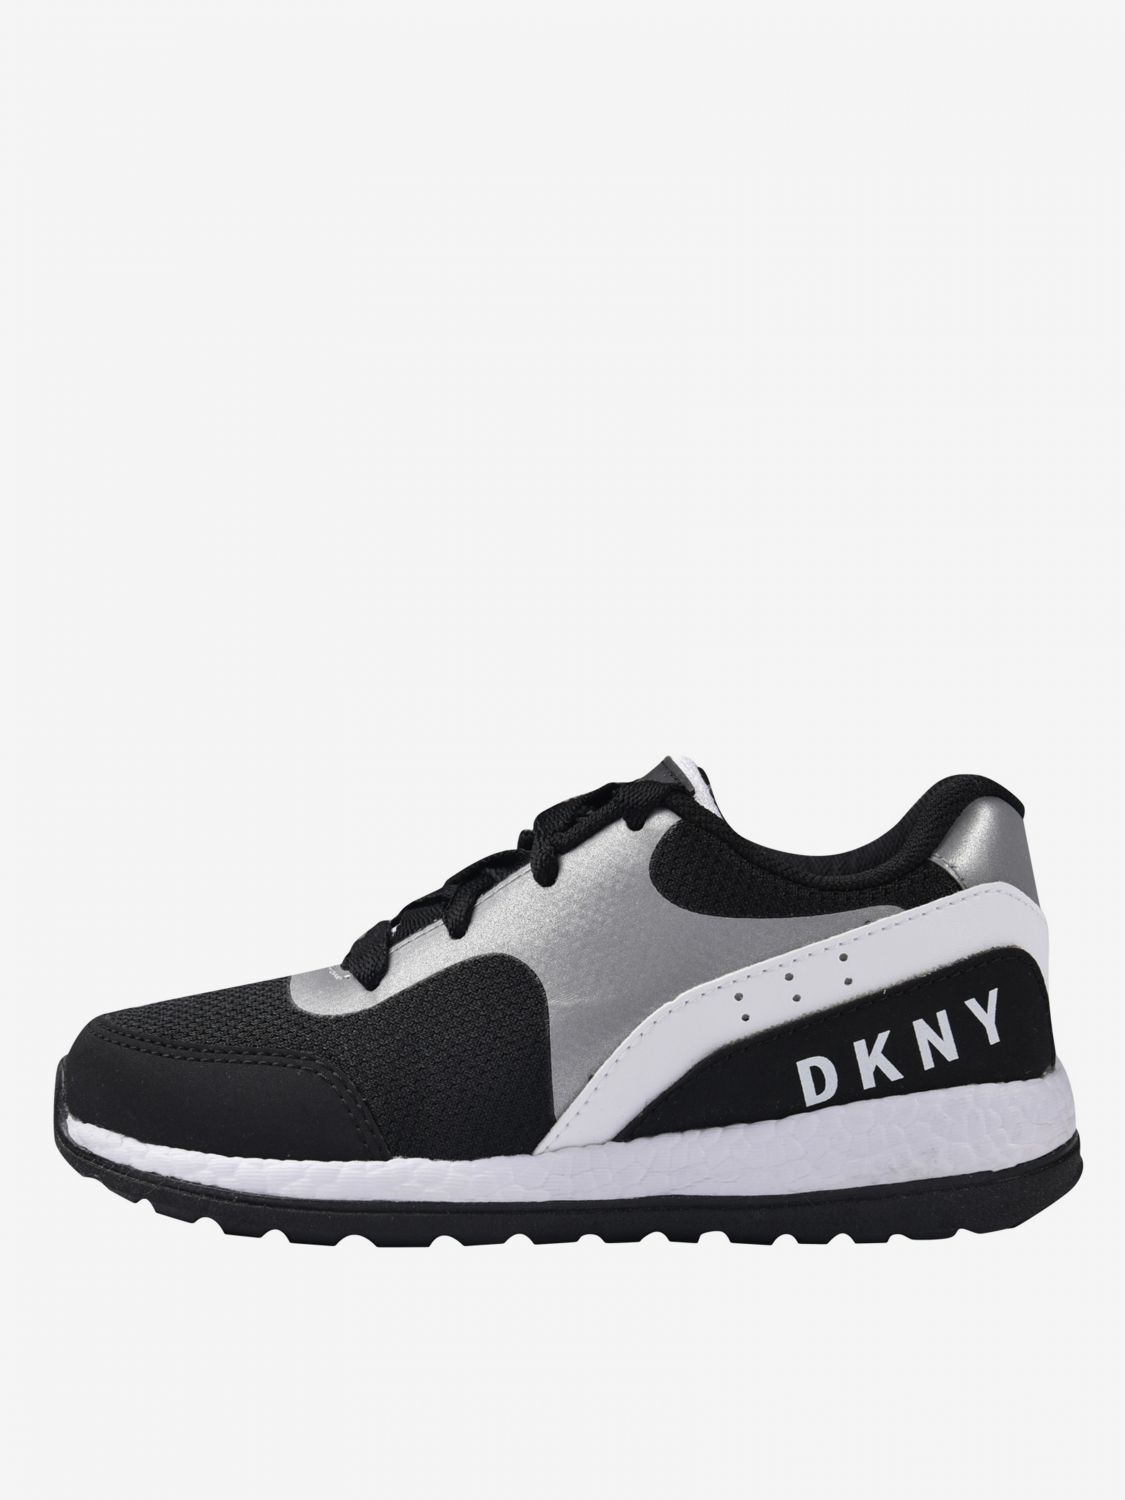 dkny casual shoes